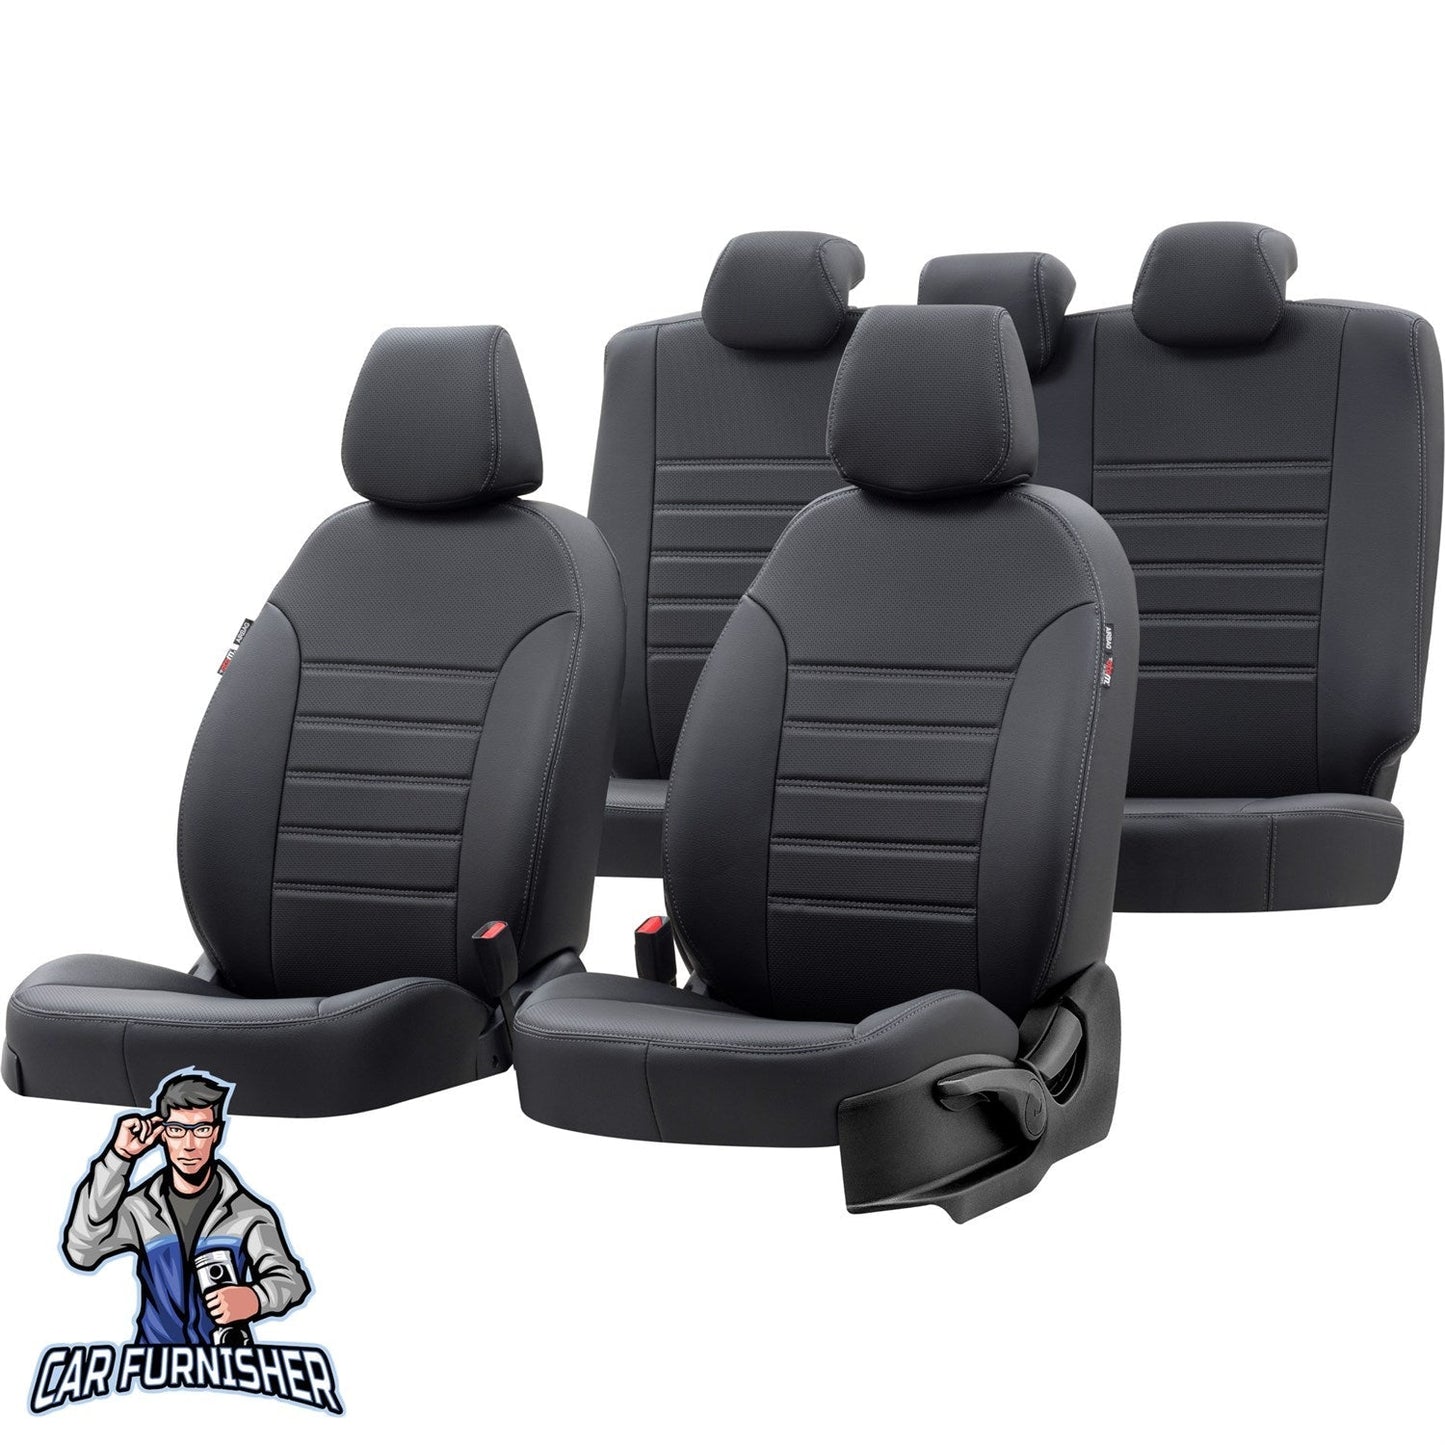 Renault Fluence Seat Covers New York Leather Design Black Leather